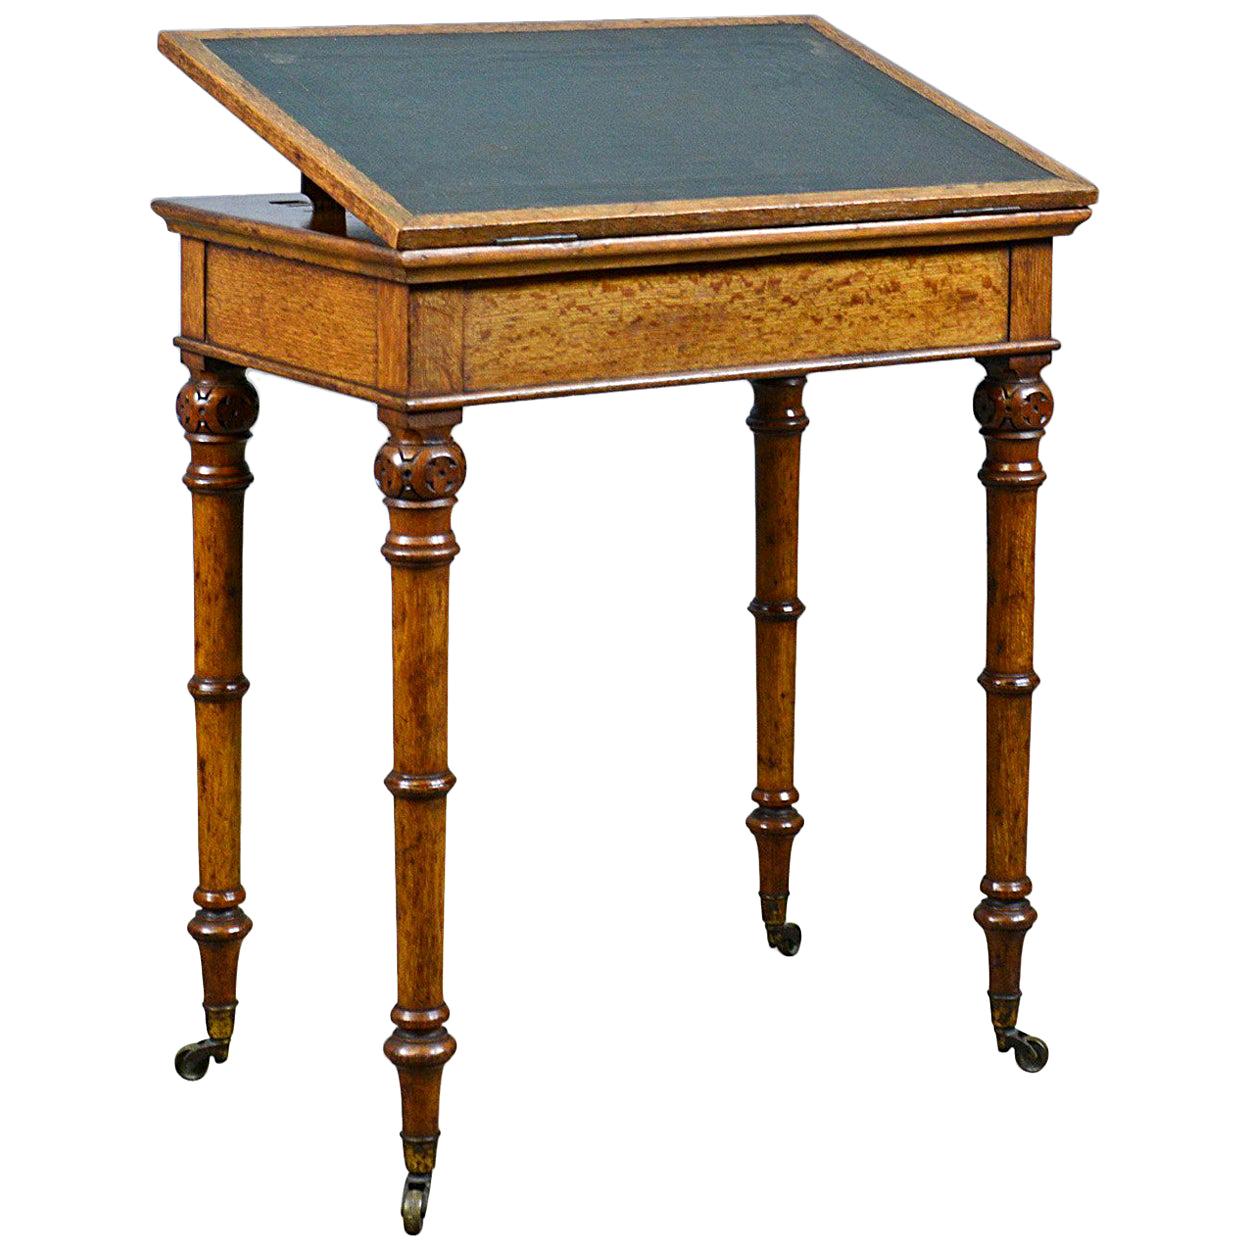 Antique, Adjustable Writing Table, English, Oak, Johnstone and Jeanes circa 1850